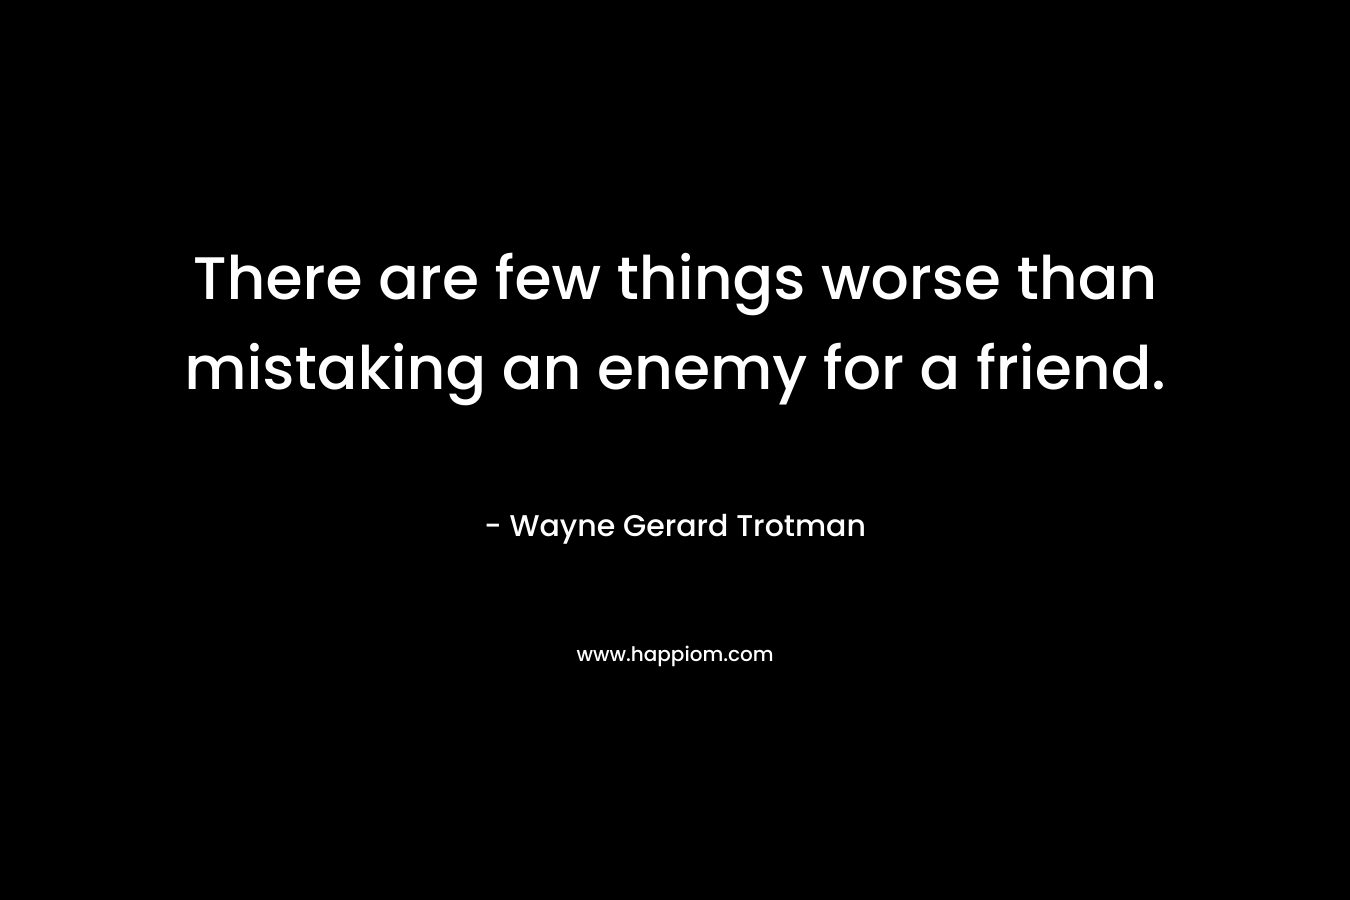 There are few things worse than mistaking an enemy for a friend.